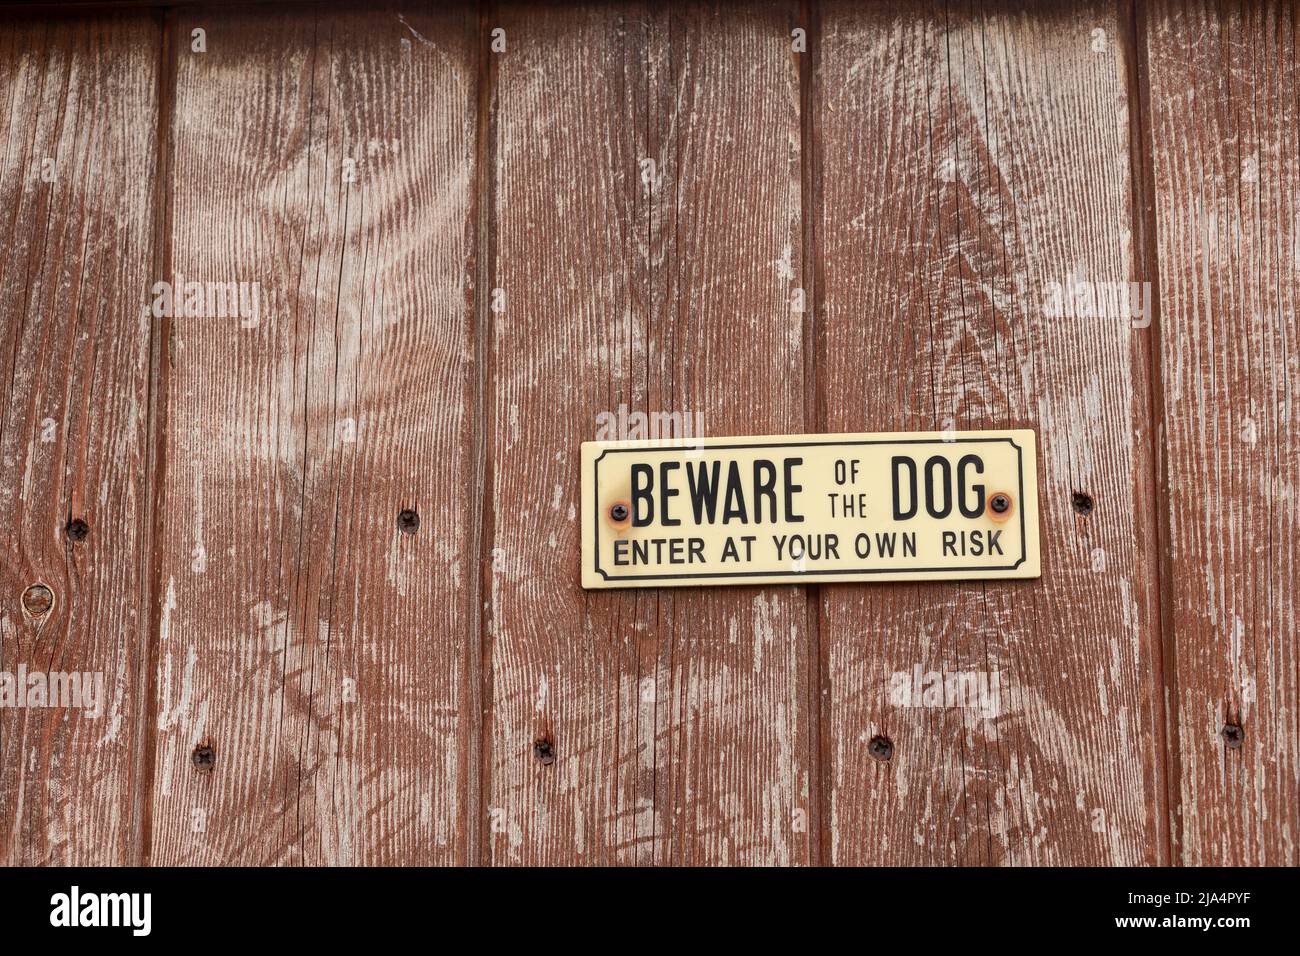 A beware of the dog sign on a wooden fence. Stock Photo